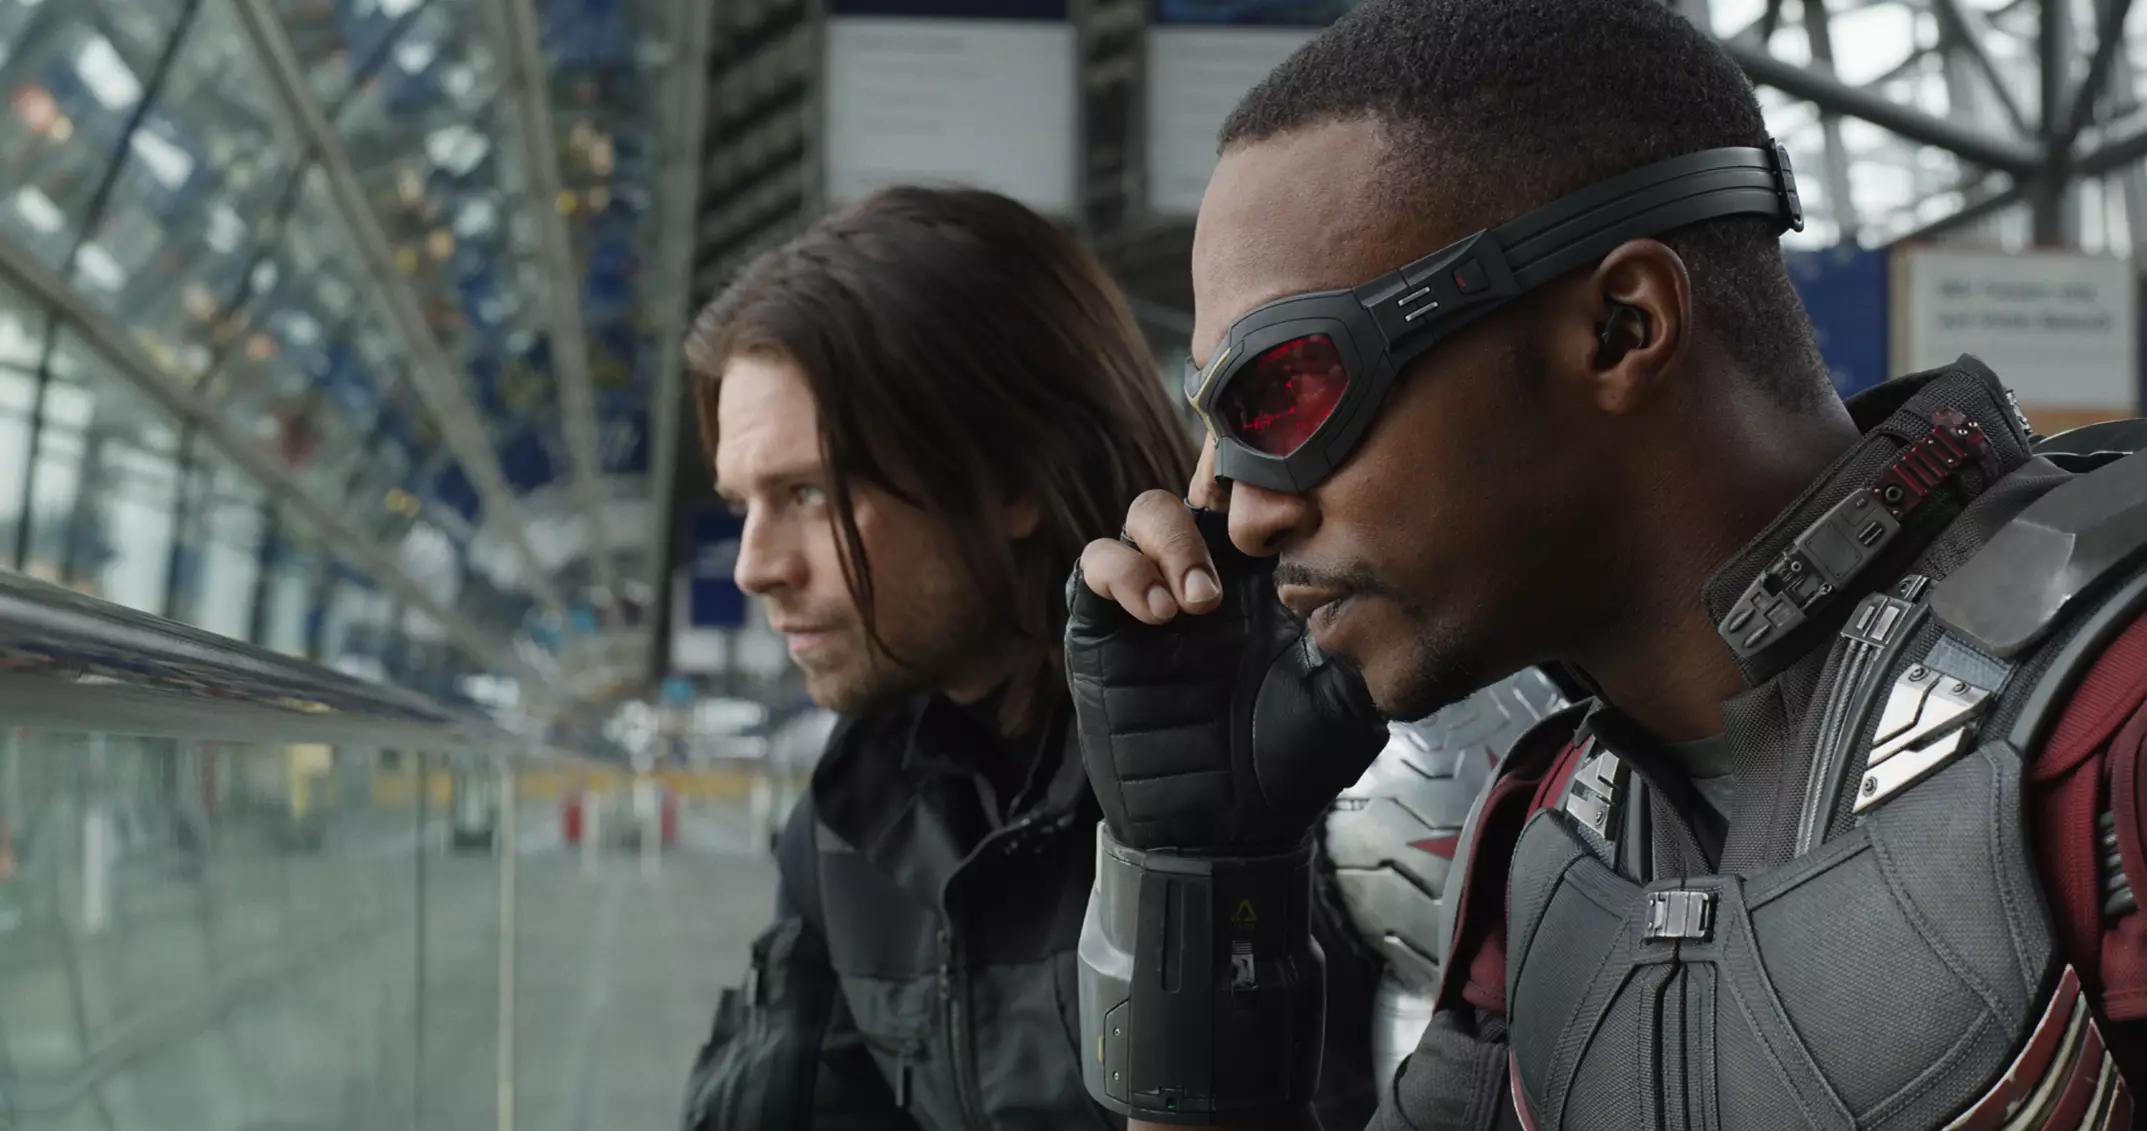 Disney+ subscribers will get to watch MCU TV show The Falcon and The Winter Soldier later this year.